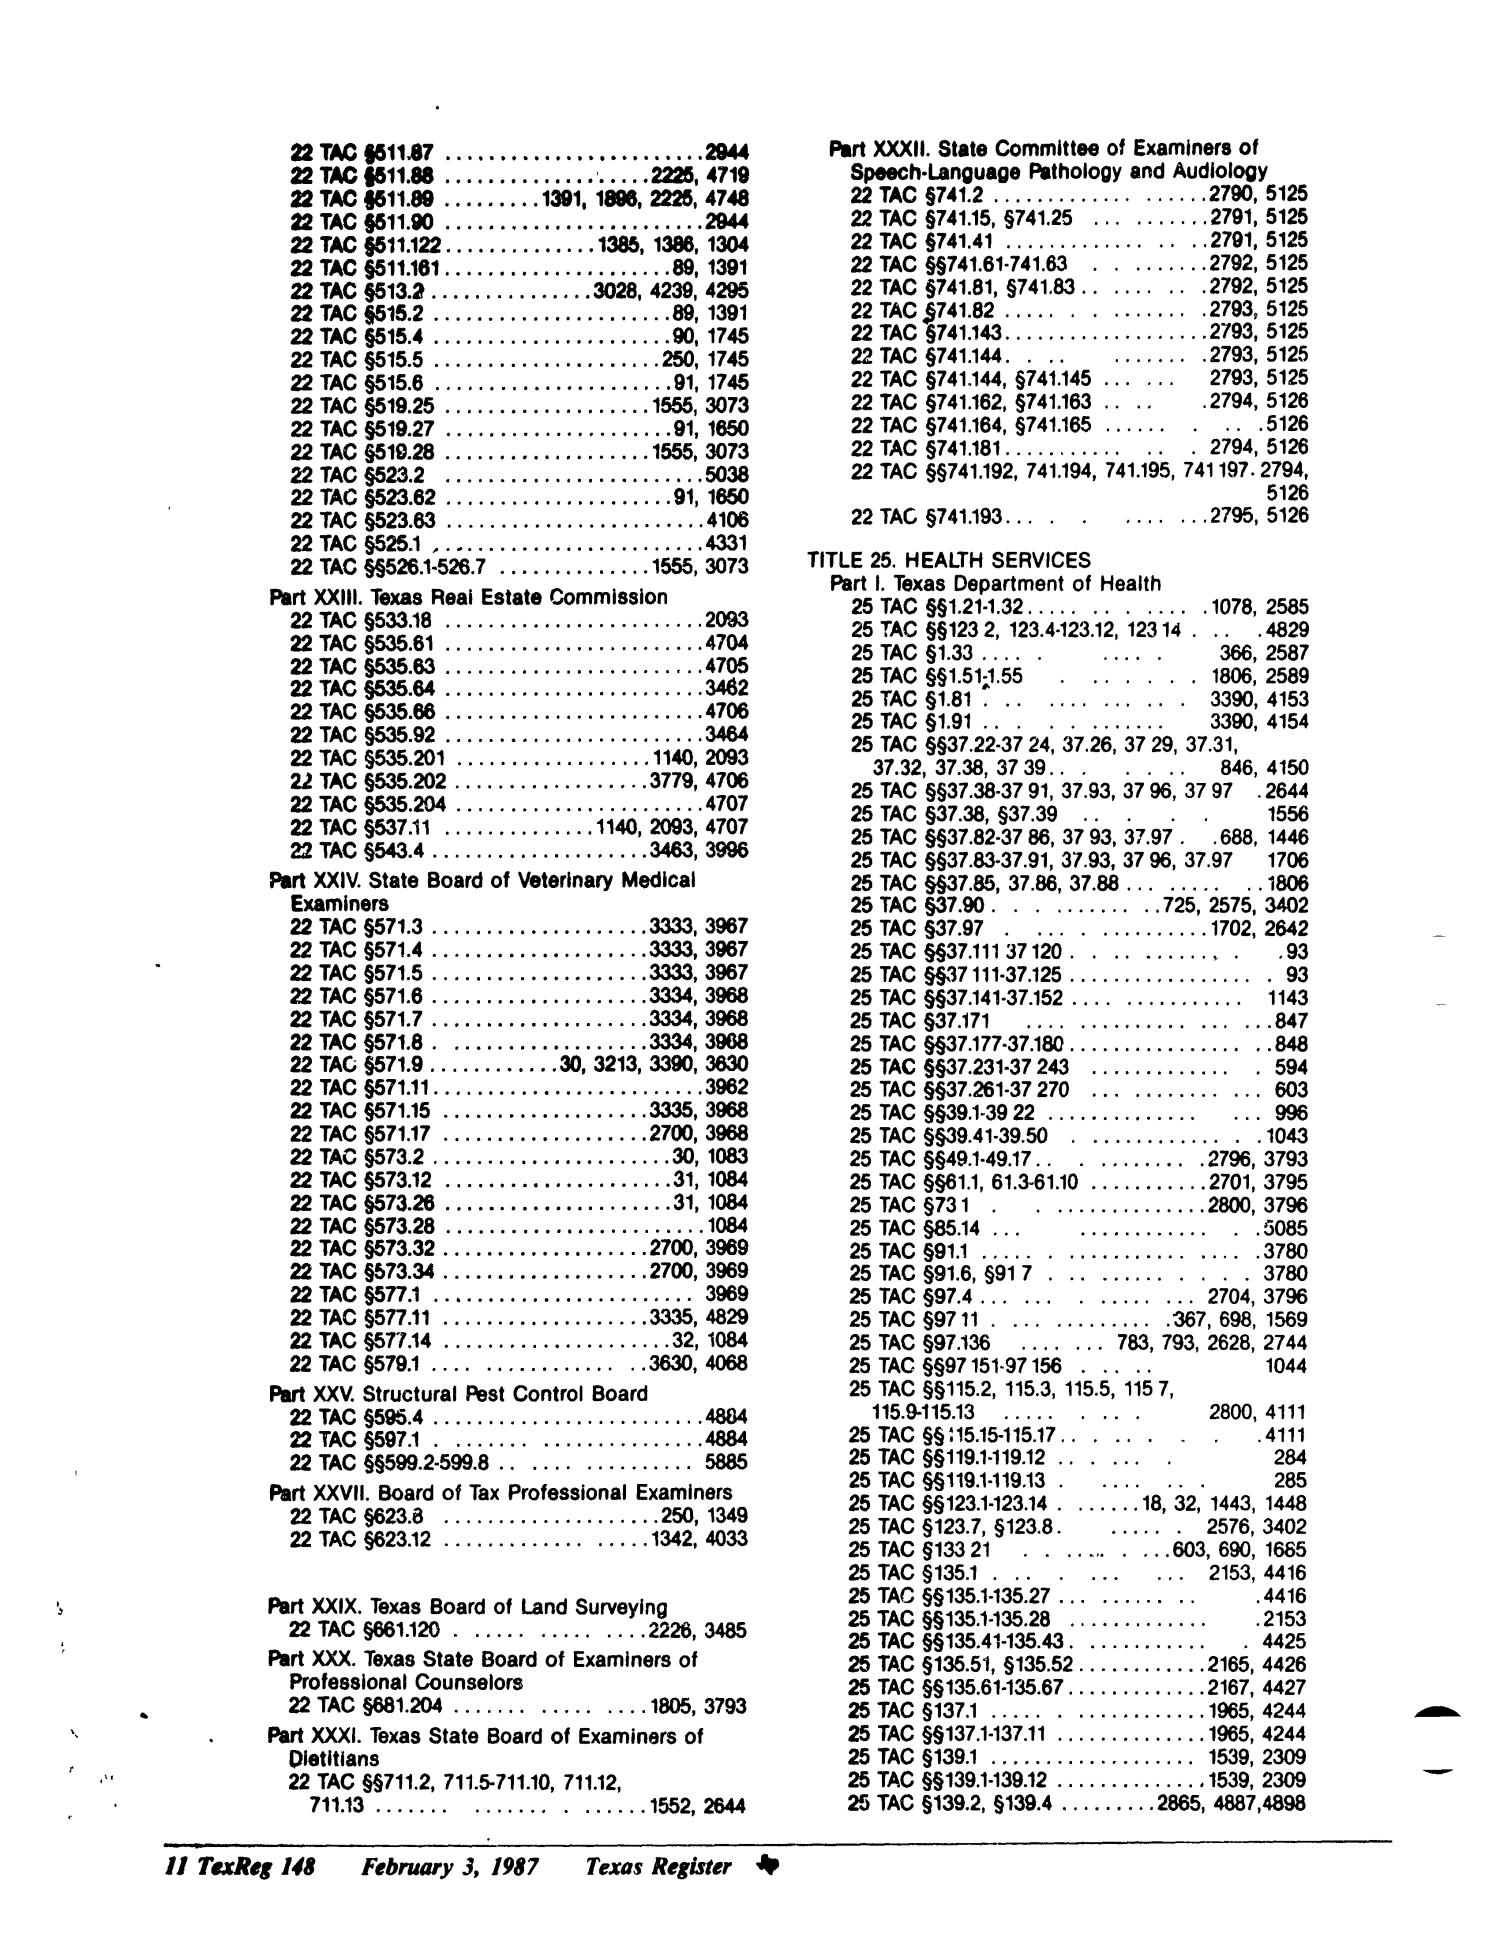 Texas Register: Annual Index January - December 1986, Volume 11 Numbers [1-96] - pages 104-157, February 3, 1987
                                                
                                                    148
                                                